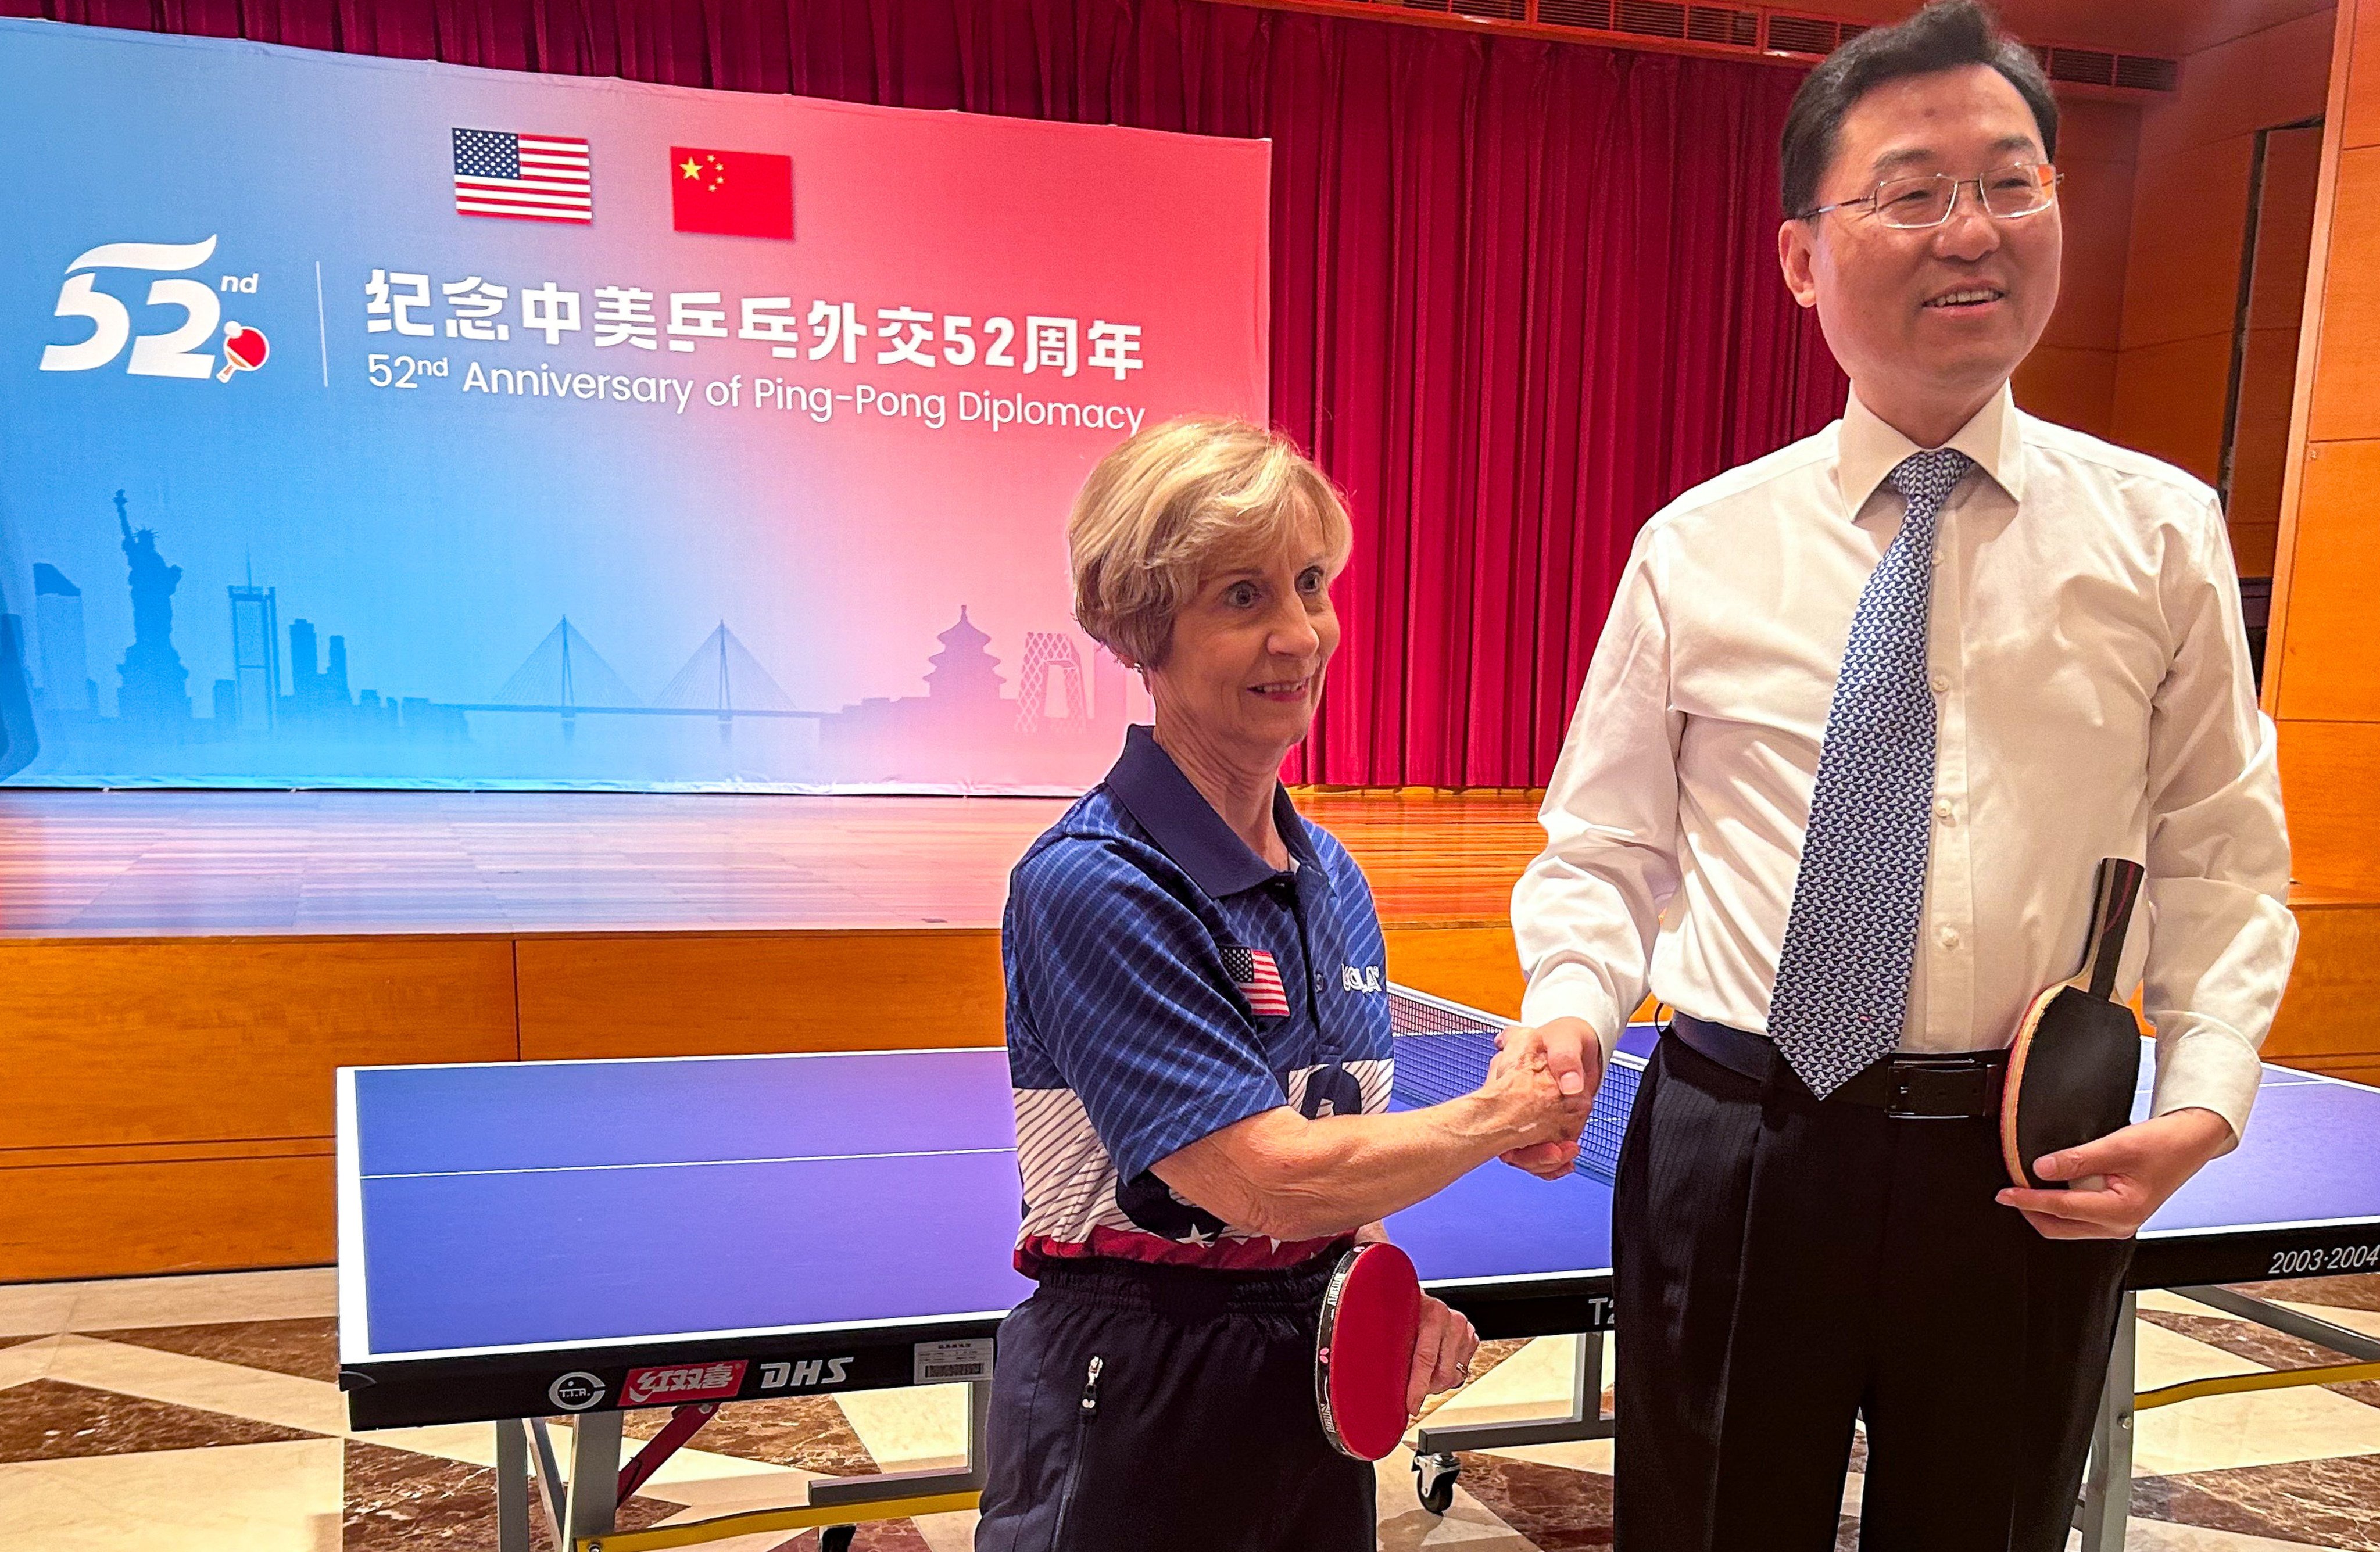 Chinese ambassador to Washington Xie Feng (right) shakes hands with American table tennis player Connie Sweeris following a friendly match at an event celebrating 52 years of “ping pong diplomacy” in Washington on Wednesday. Photo: Khushboo Razdan